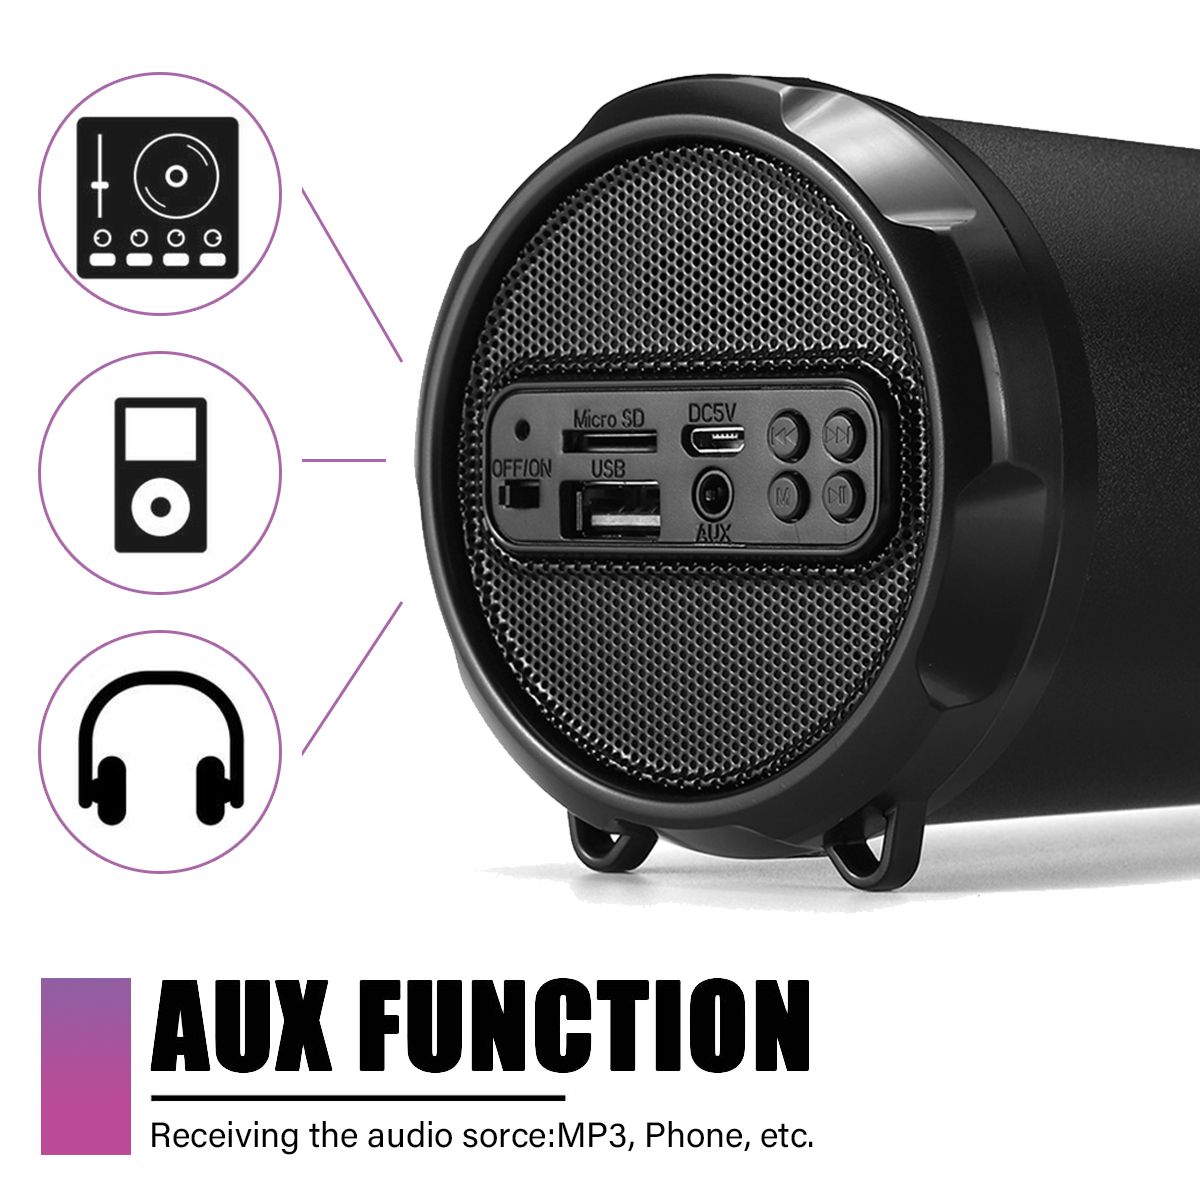 Wireless-Player-Portable-bluetooth-Speaker-Subwoofer-Outdoor-Headset-With-Mic-Suport-FM-AUX-USB-Micr-1416275